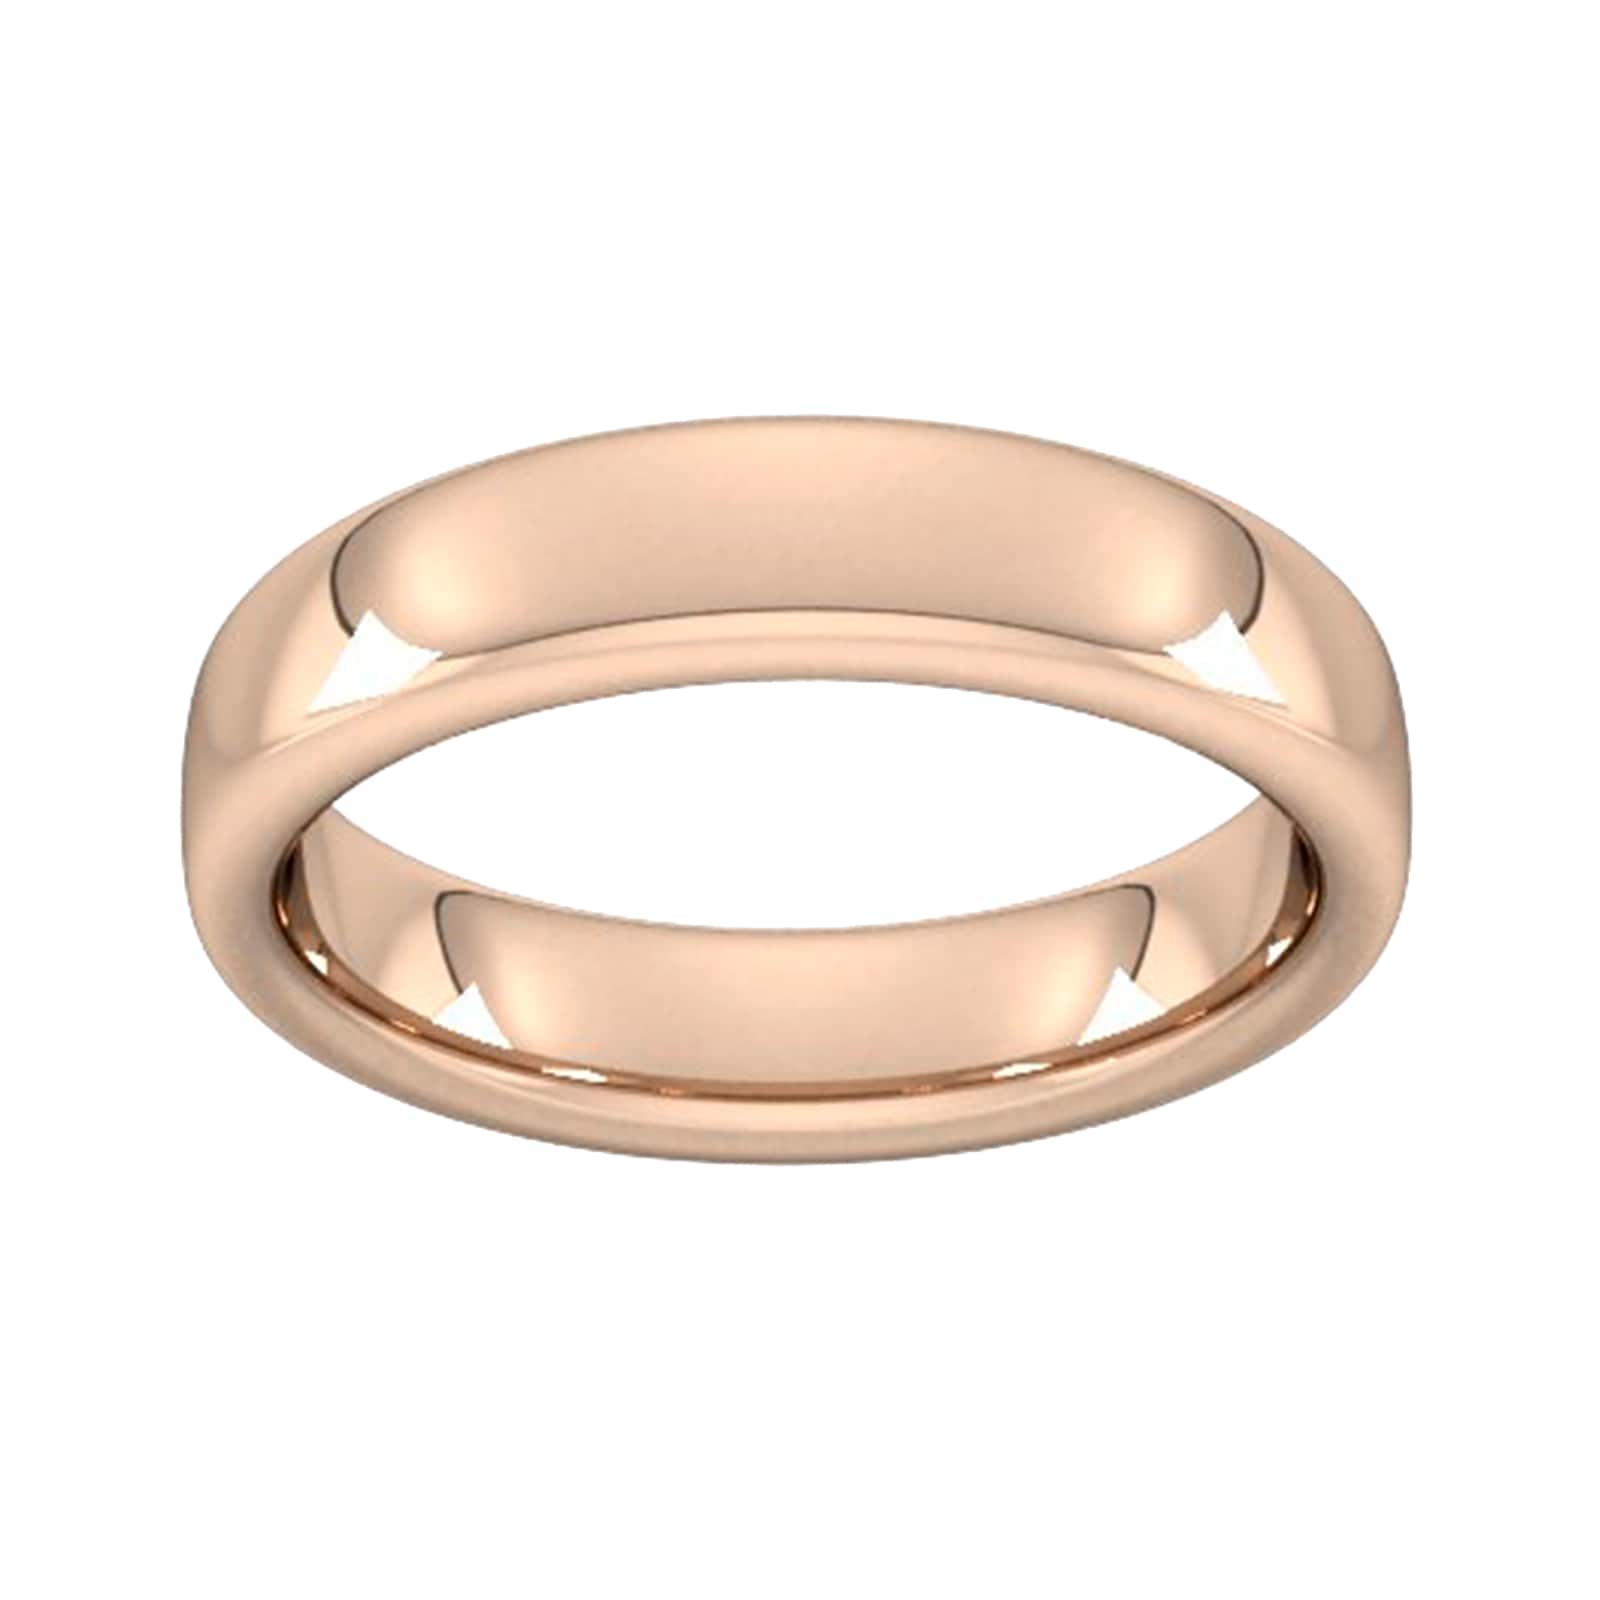 5mm Slight Court Extra Heavy Wedding Ring In 18 Carat Rose Gold - Ring Size H